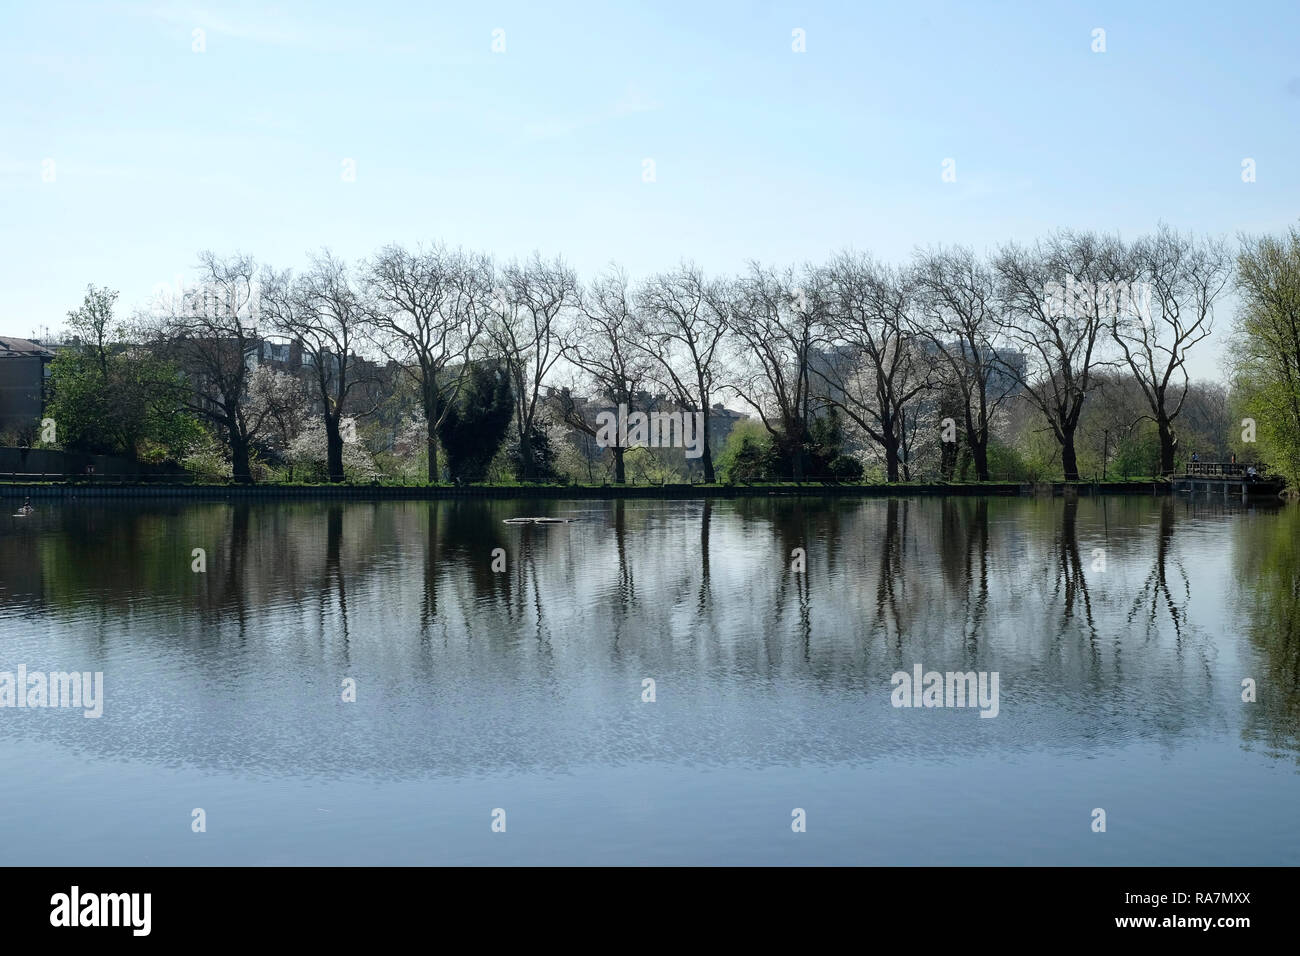 Reflection of trees in a pond, Hampstead Heath, London Stock Photo